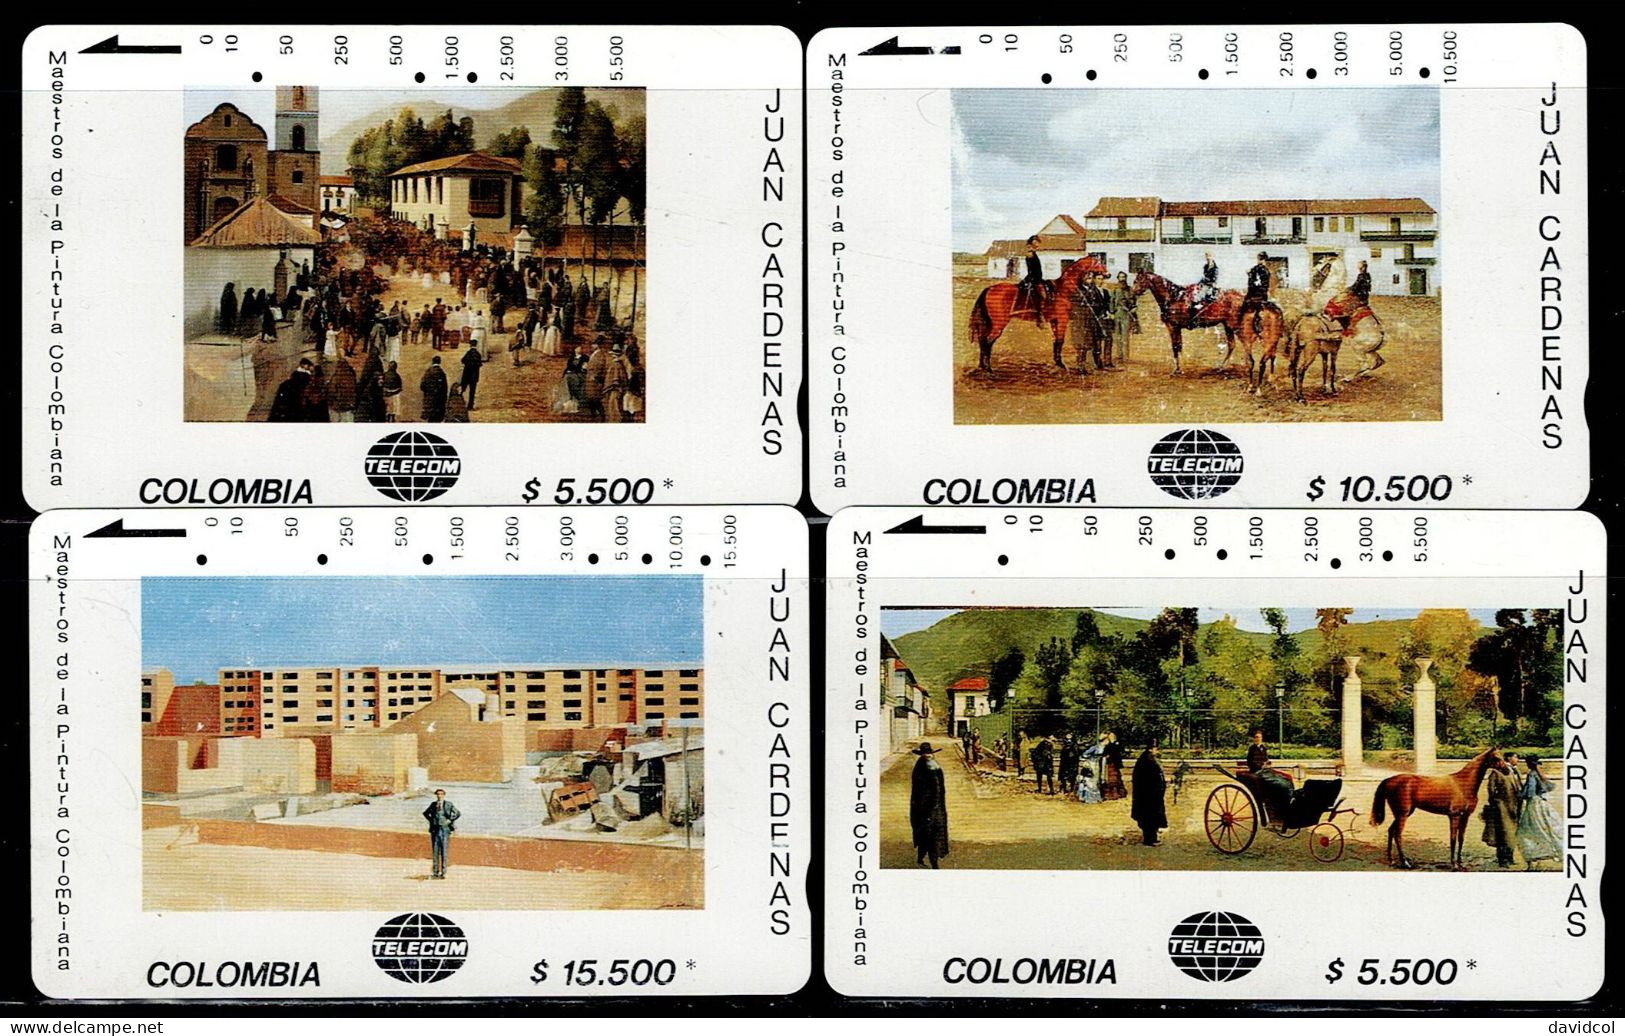 TT11-COLOMBIA TAMURA CARDS 1990's - USED SET MASTER PAINTERS - JUAN CARDENAS - Colombia